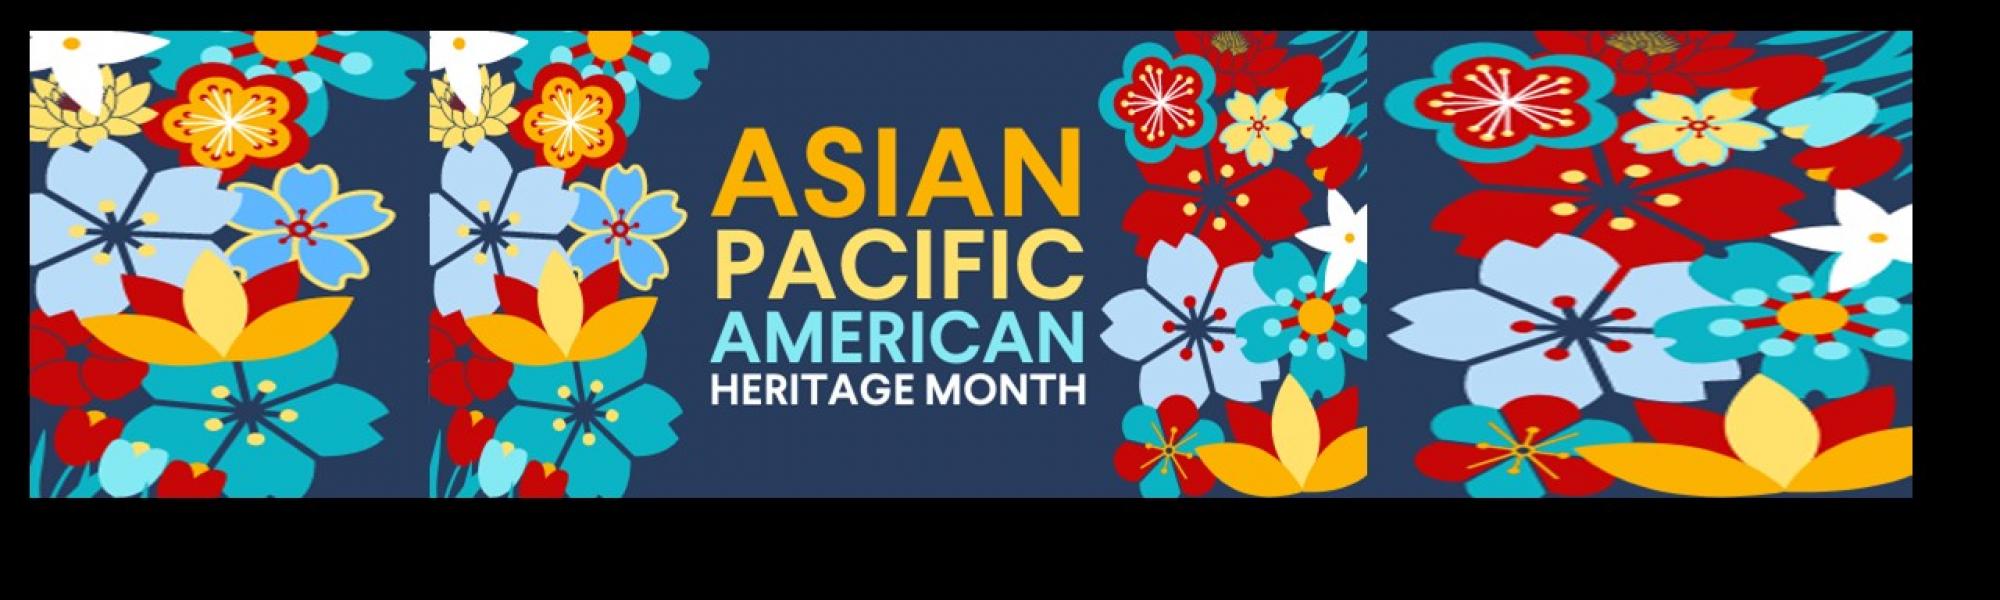 Asian heritage month